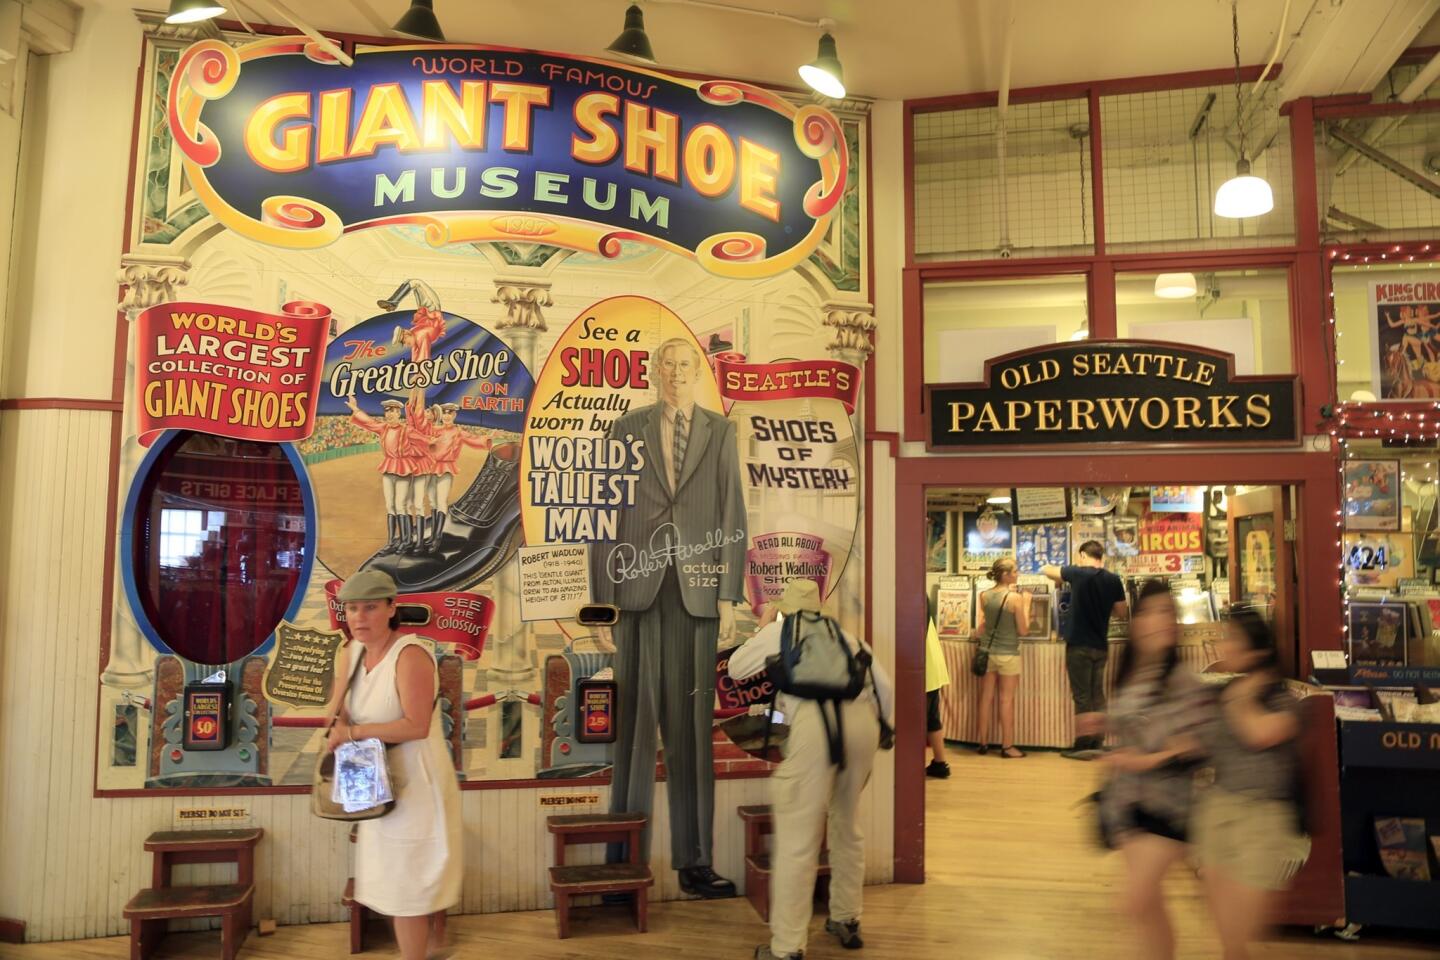 The Giant Shoe Museum